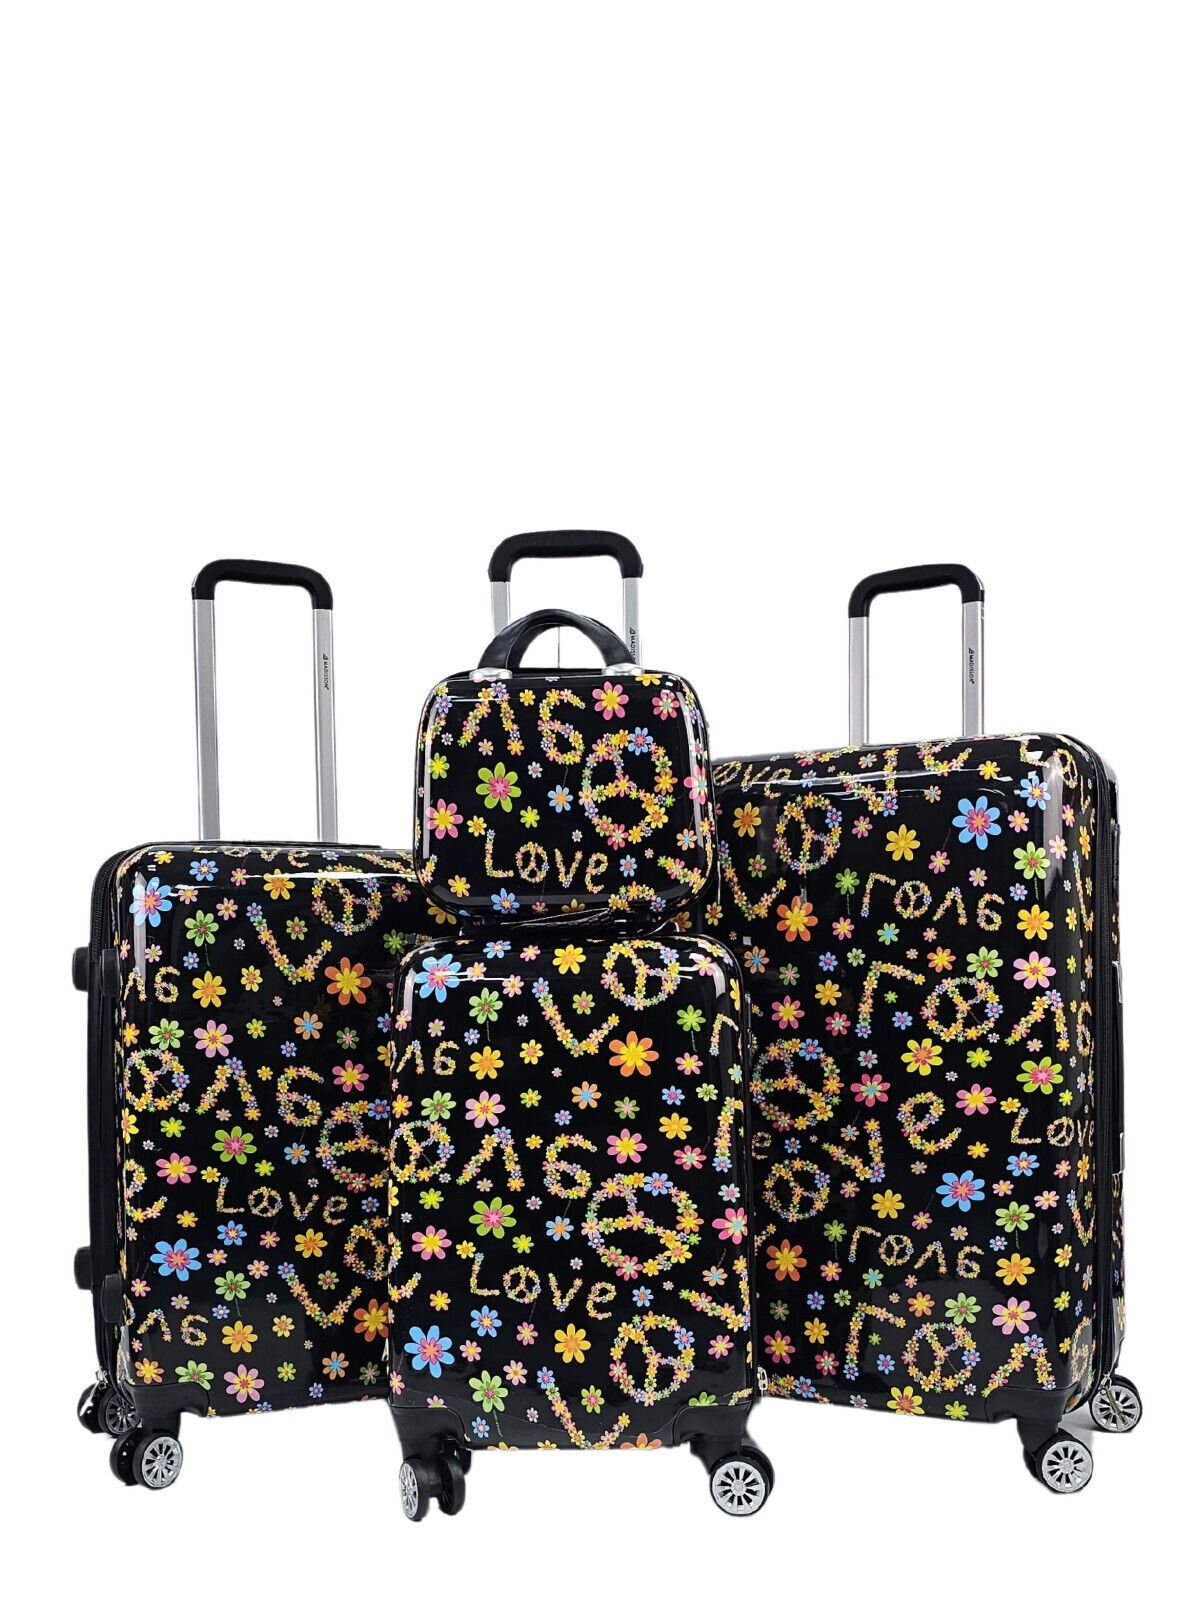 Clanton Set of 4 Hard Shell Suitcase in Love